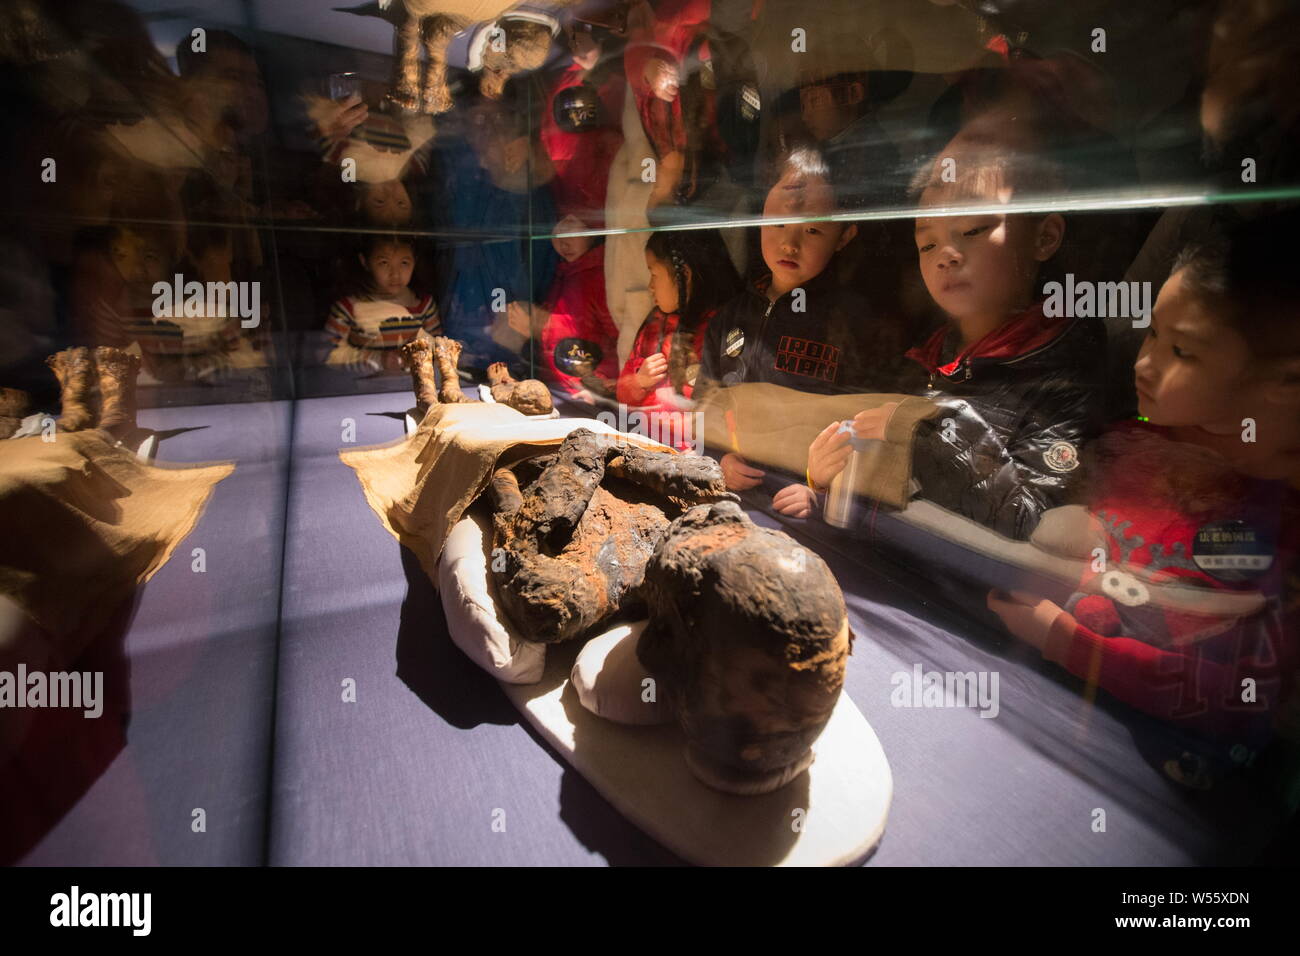 People look at a mummy displayed in an exhibition of ancient Egyptian civilization at Zhejiang West Lake Gallery in Hangzhou city, east China's Zhejia Stock Photo